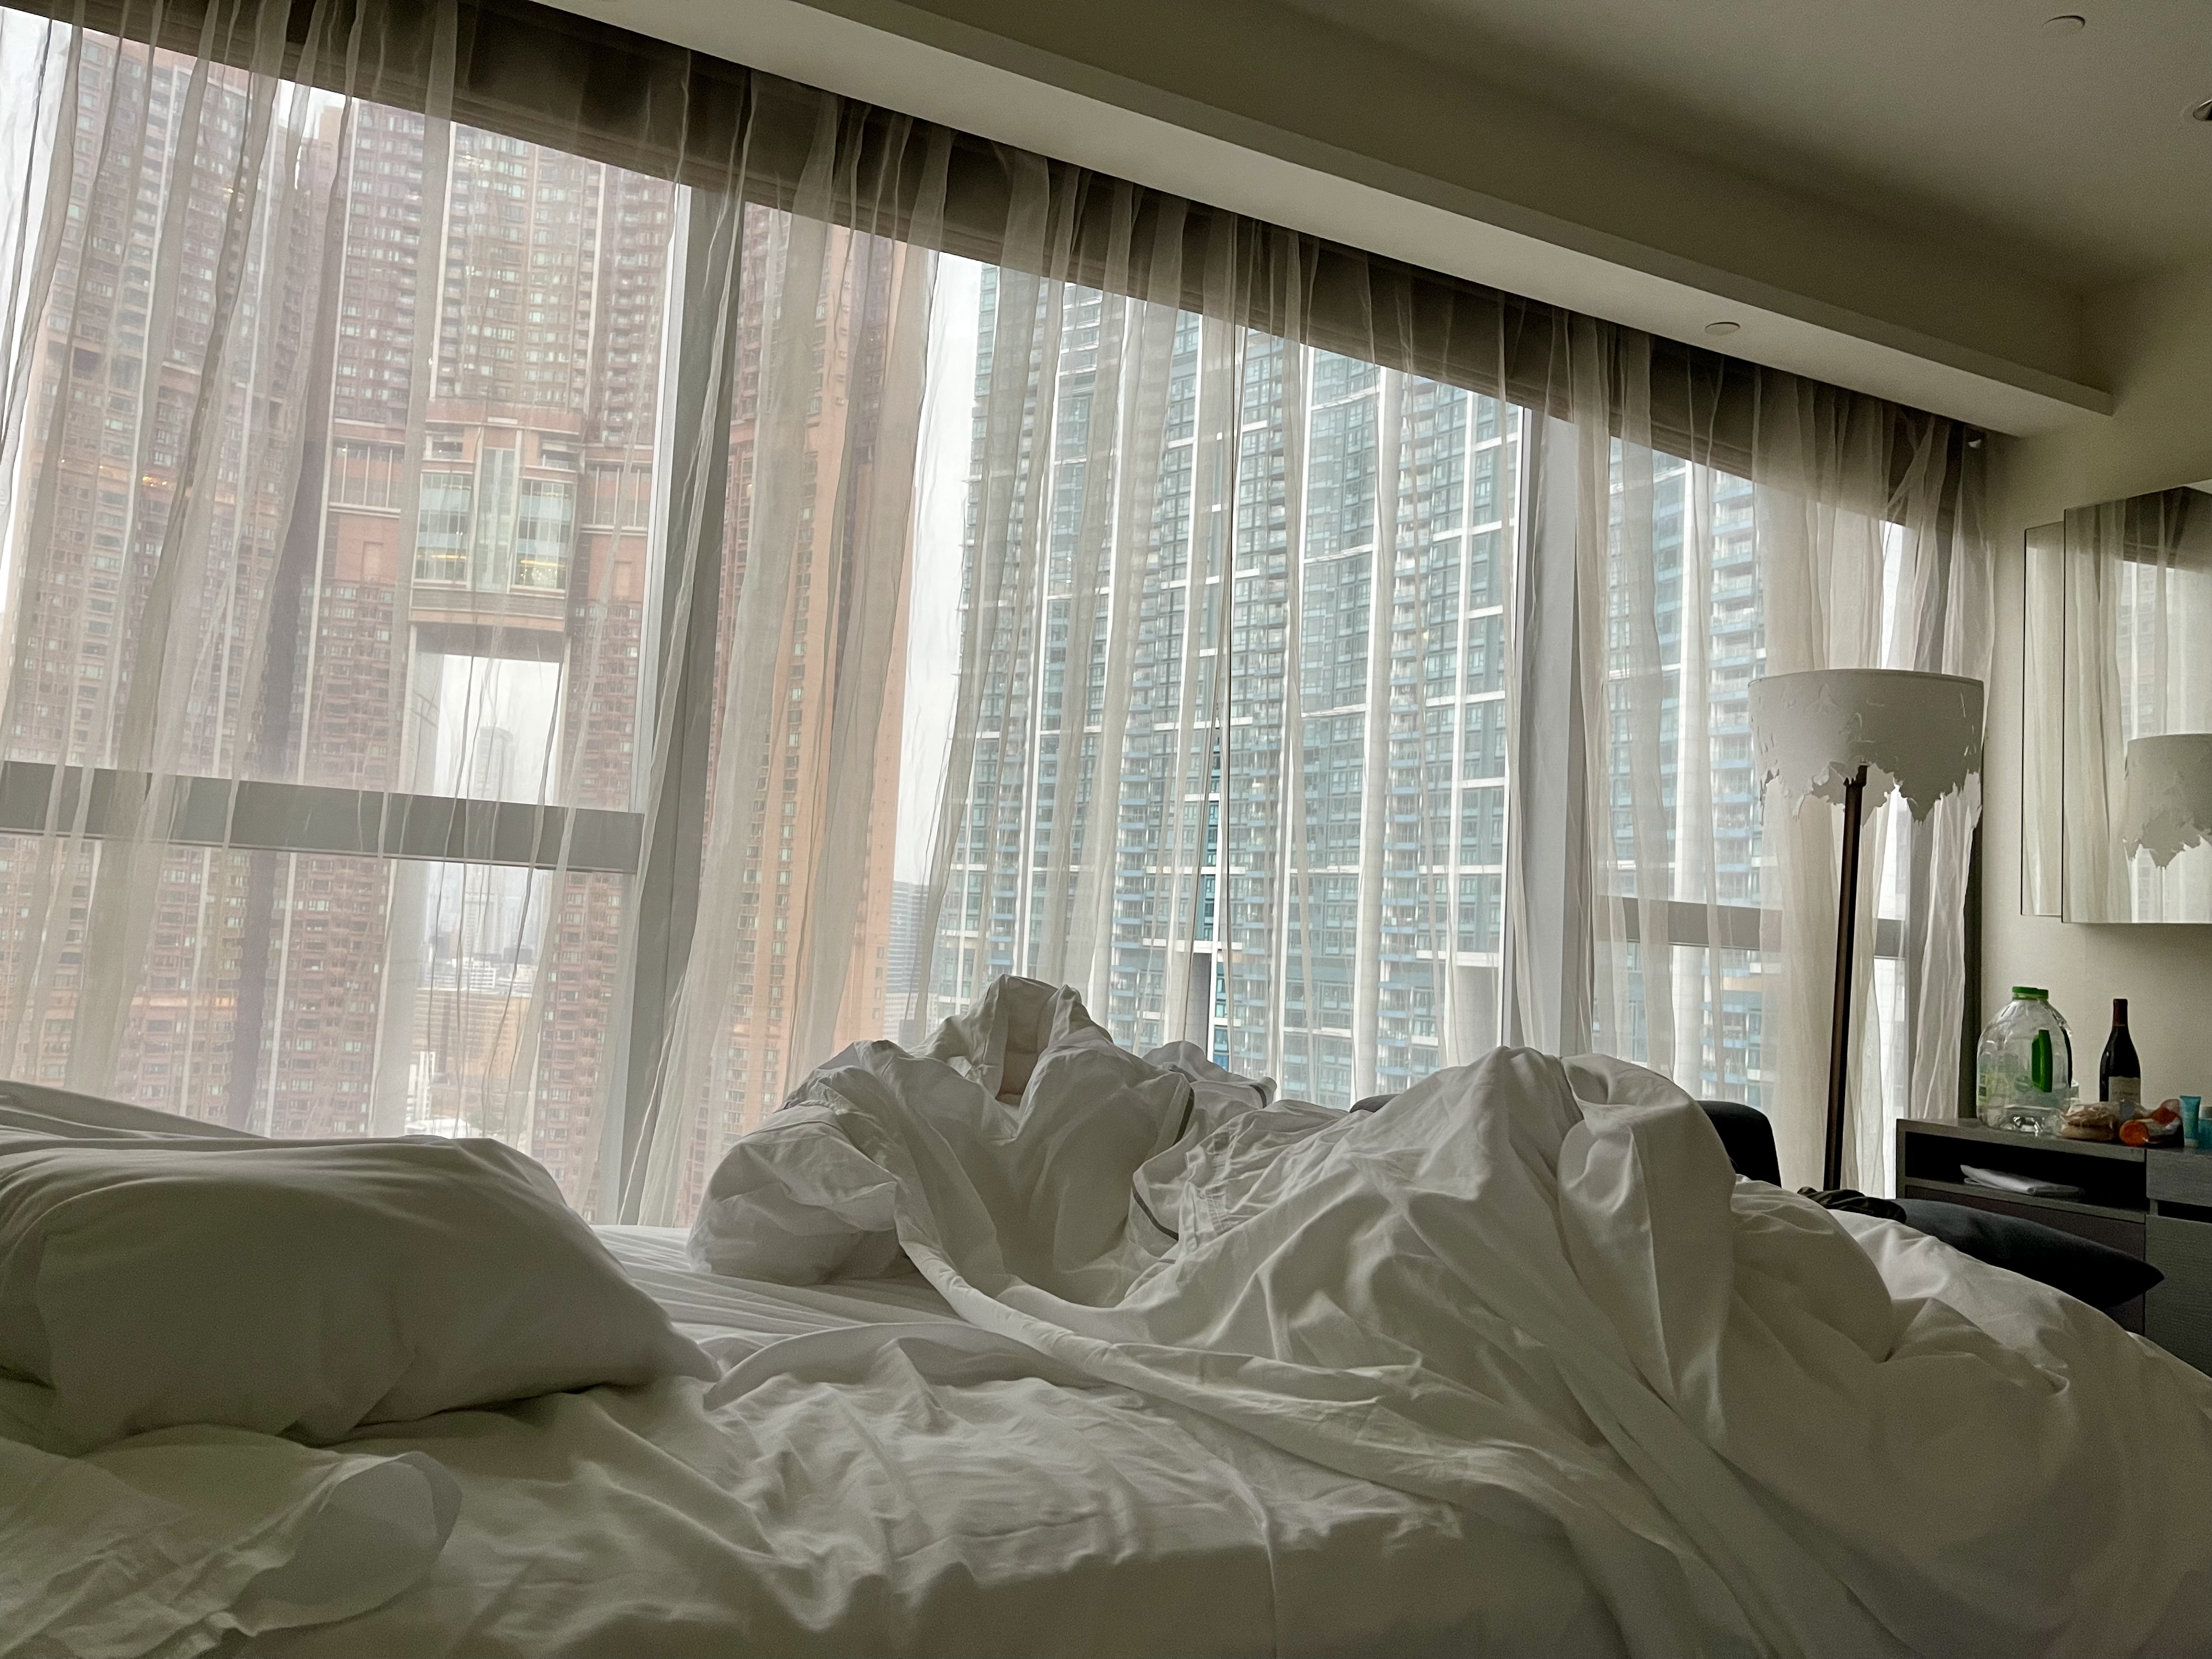 Hotel bed and towers beyond